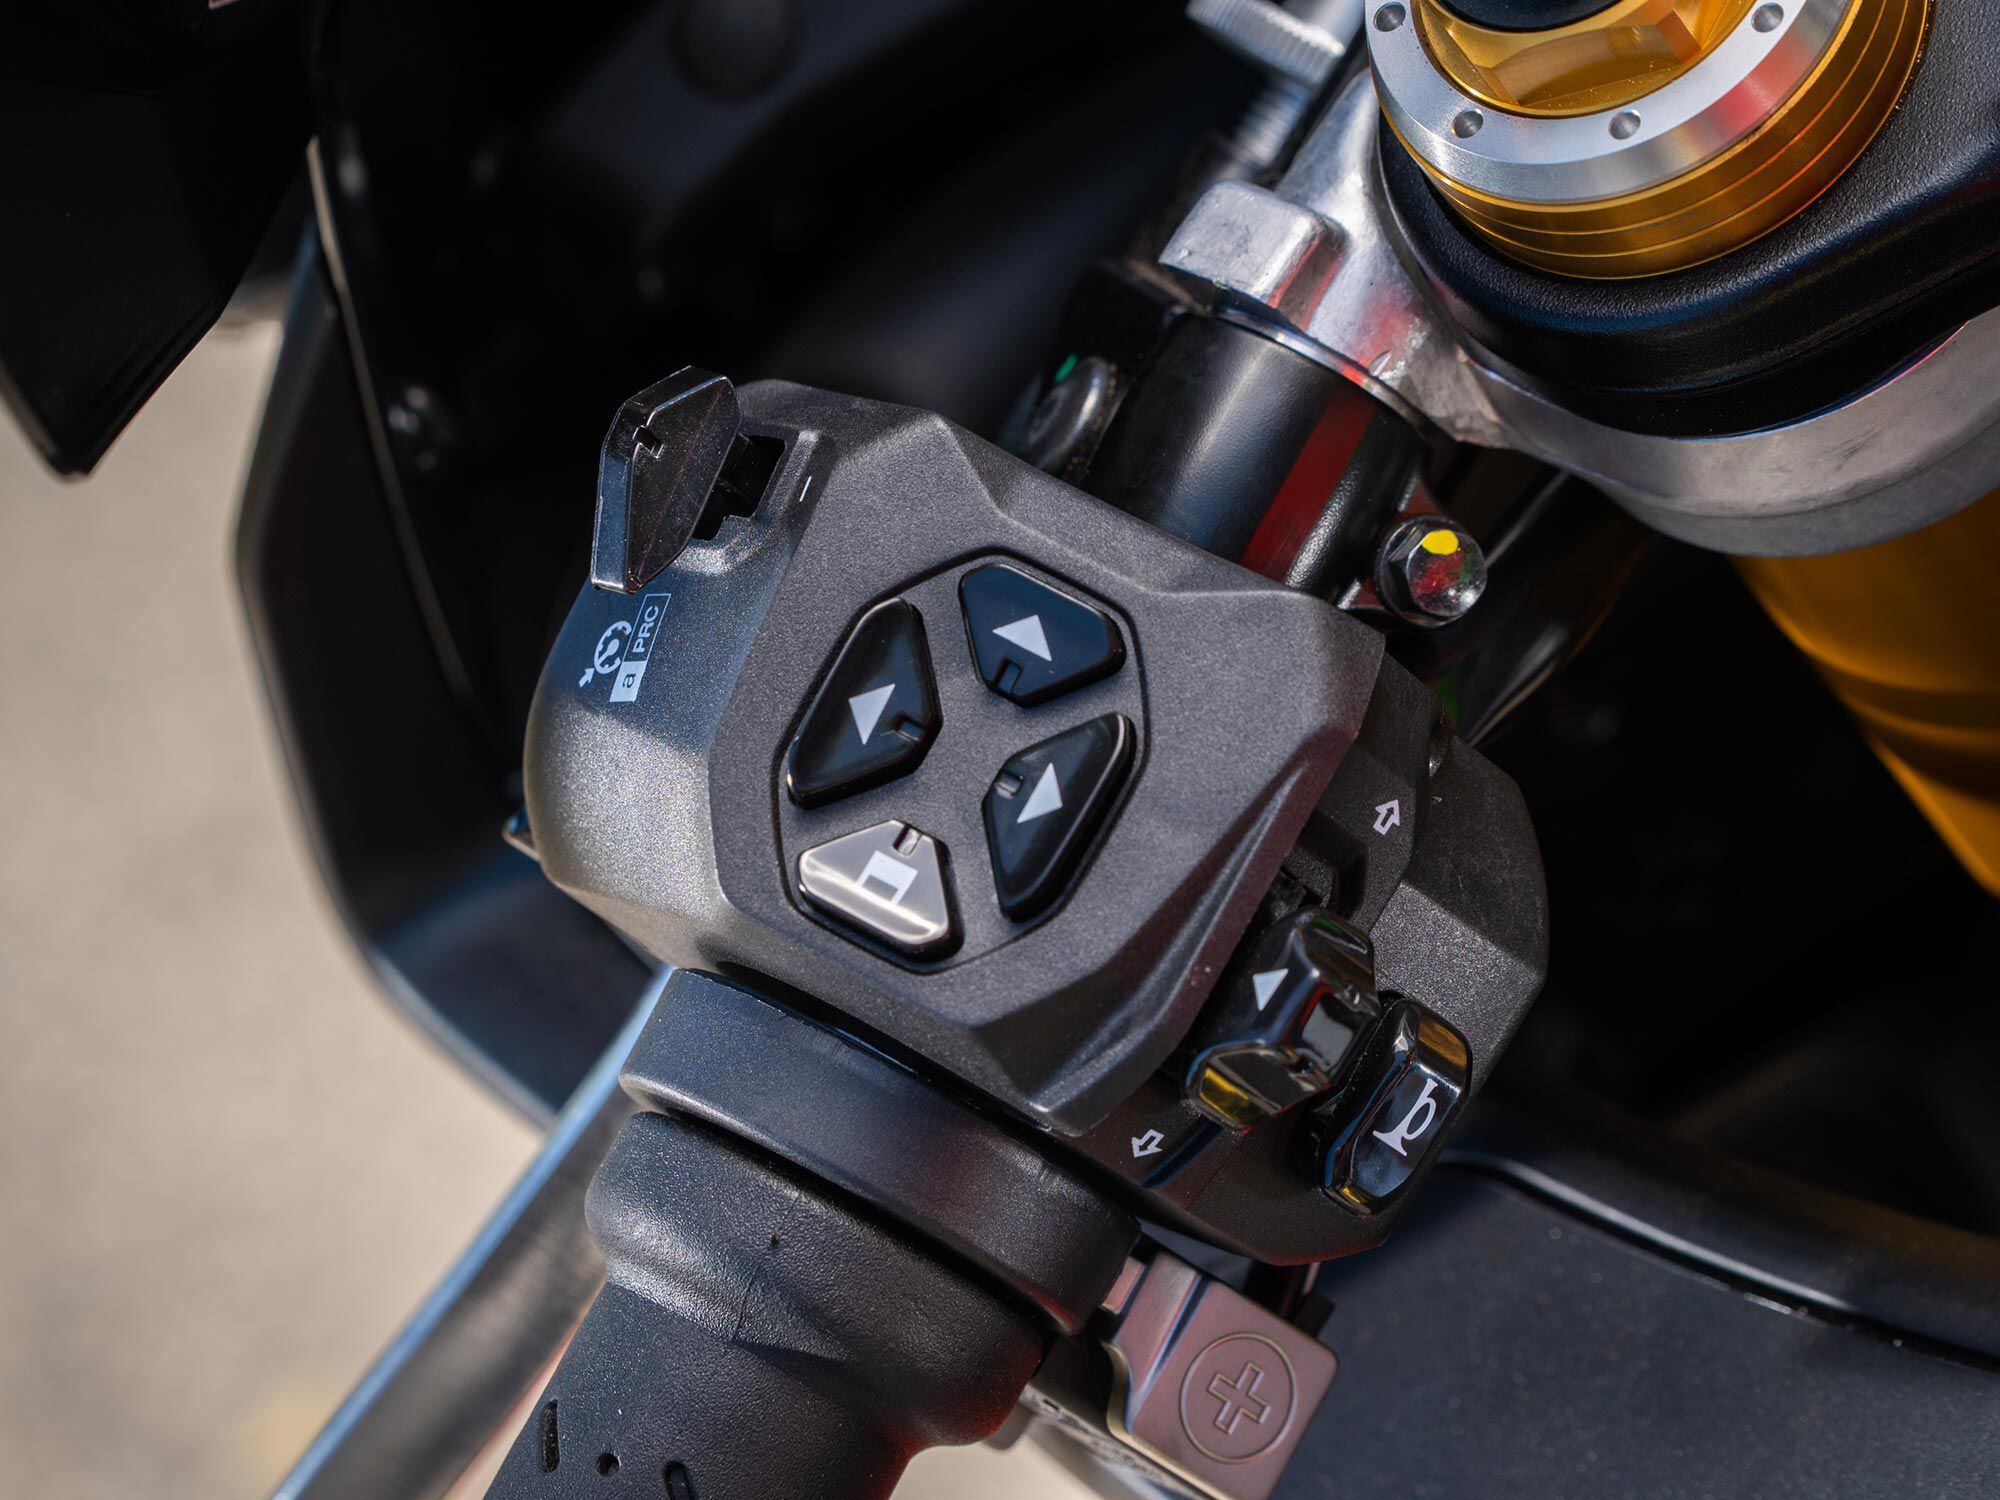 This joystick manipulates the RSV4’s instrument panel. It is easy to use and the switchgear offers pleasing tactile function with gloves.